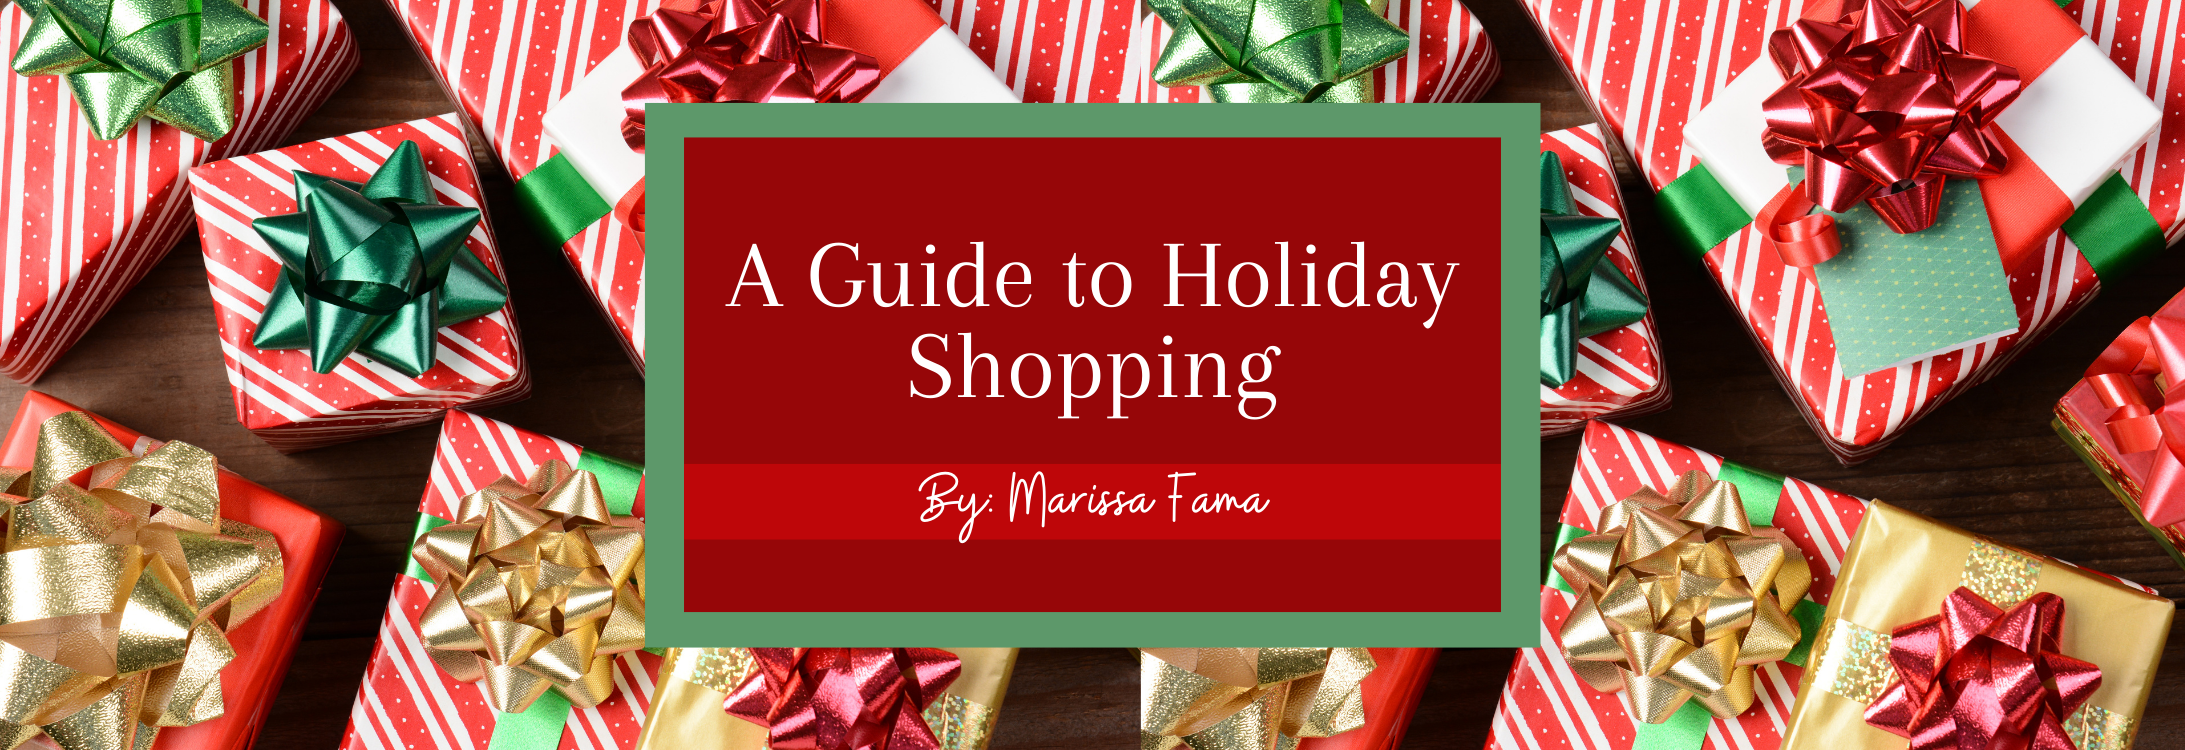 A guide to Holiday Shopping blog cover